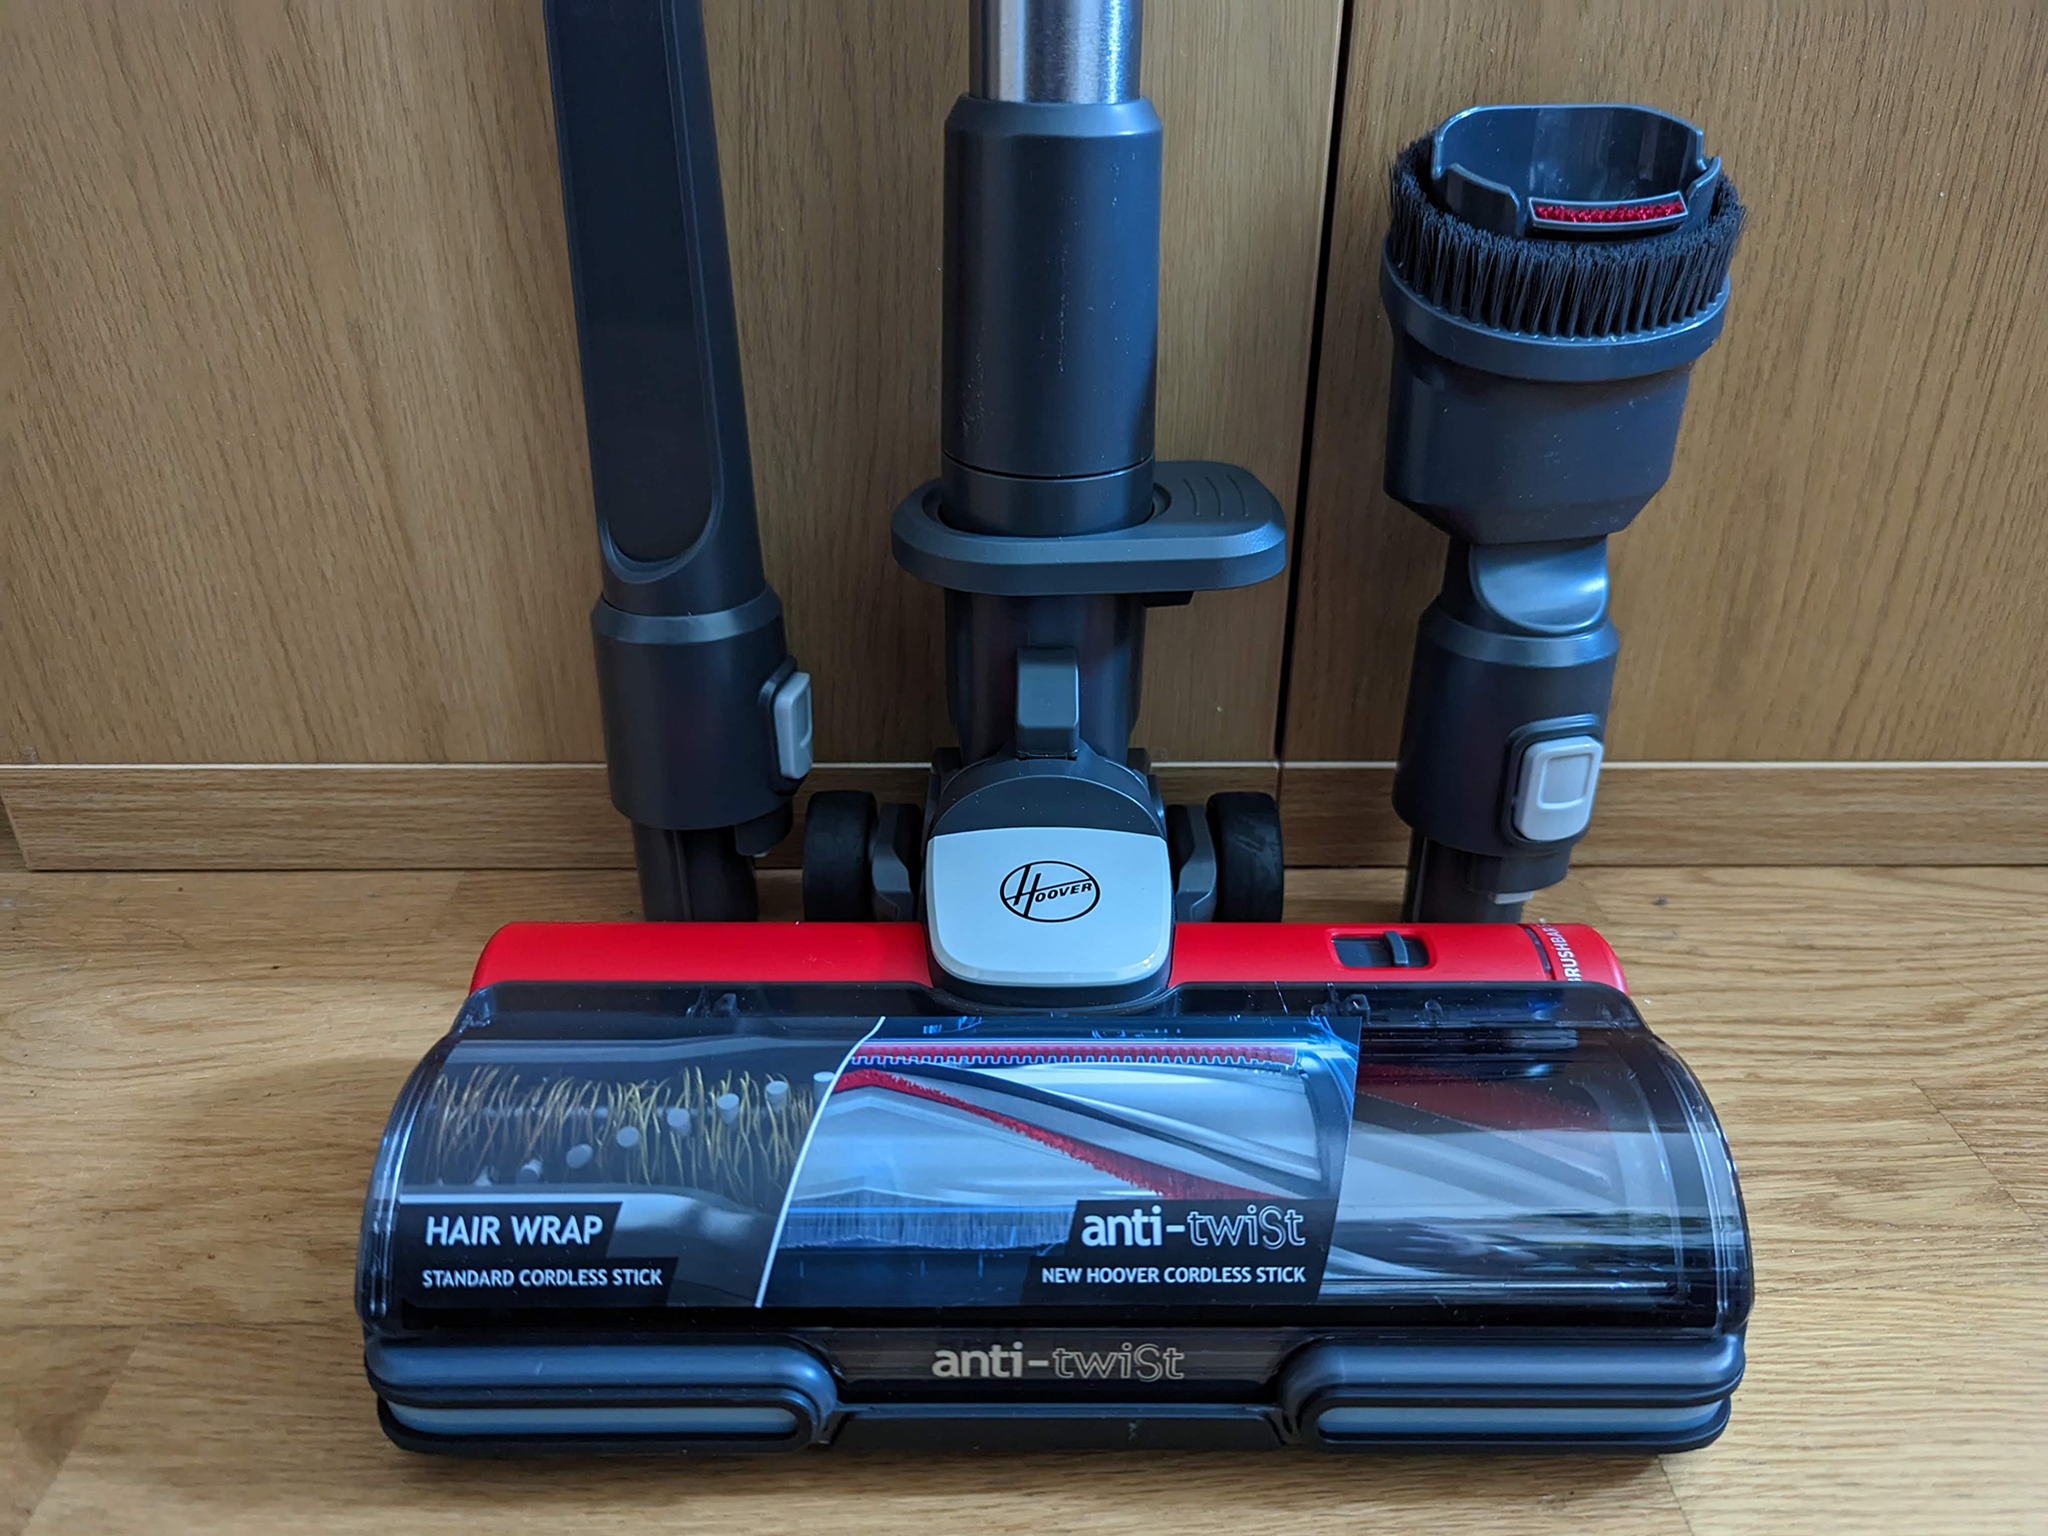 Hoover HF9 vacuum cleaner review: A cordless machine that gets the job done